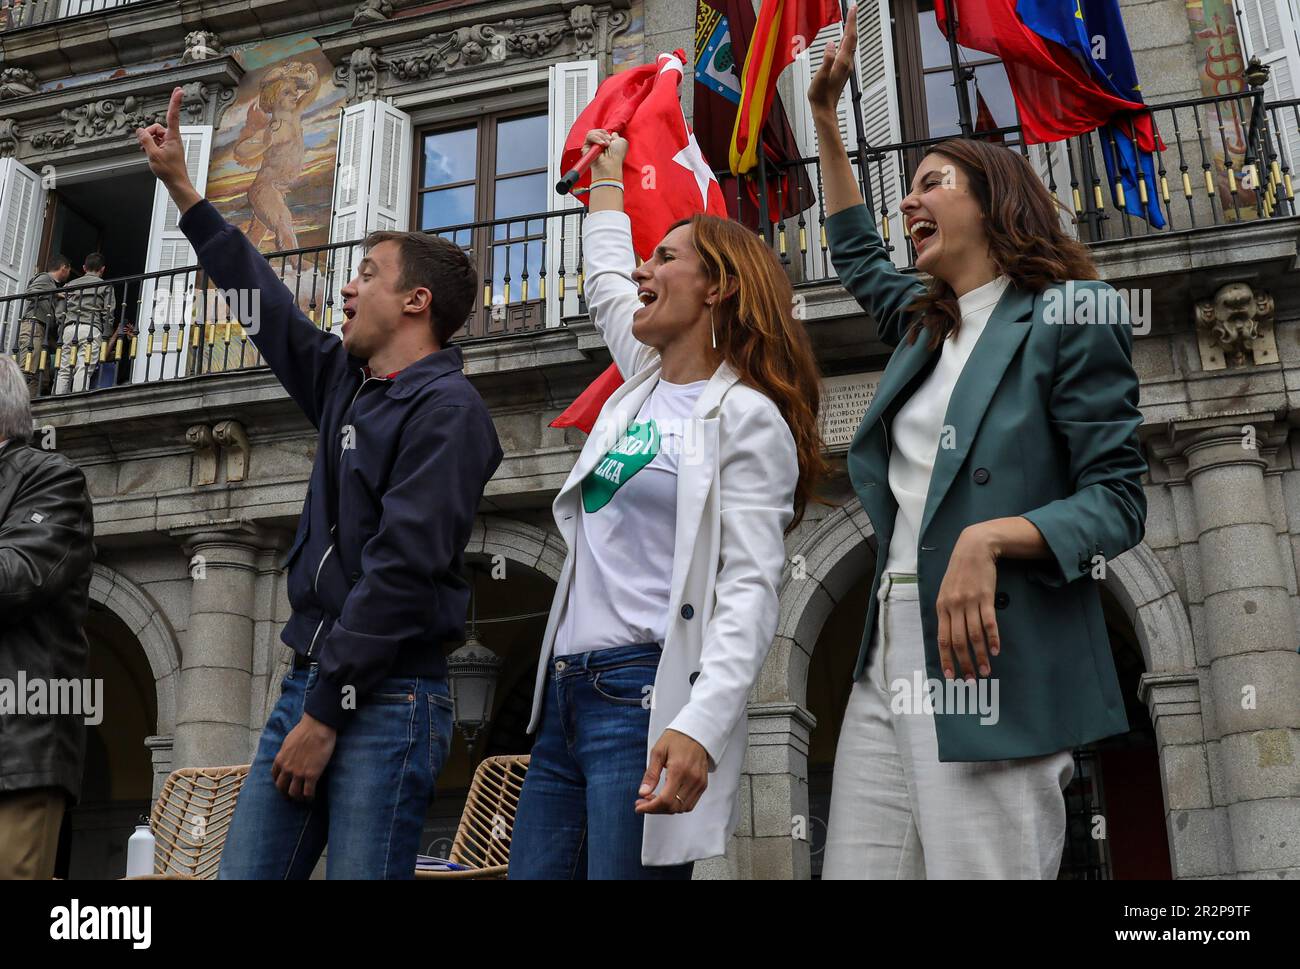 Monica Garcia (C), candidate for the presidency of the Community of Madrid in the elections on May 28, Rita Maestre (R), candidate for mayor of the Spanish capital for the Mas Madrid party (R) and Iñigo Errejón ( L) deputy of the Cortes for the Mas Pais party greet those present from the scene of the political act. The left-wing political party, Mas Madrid, held a rally in the Plaza Mayor in Madrid. At the rally, Mónica García, candidate for president of the Madrid community, presented her political program to her supporters. Among others, they have accompanied her, Iñigo Errejón deputy of the Stock Photo